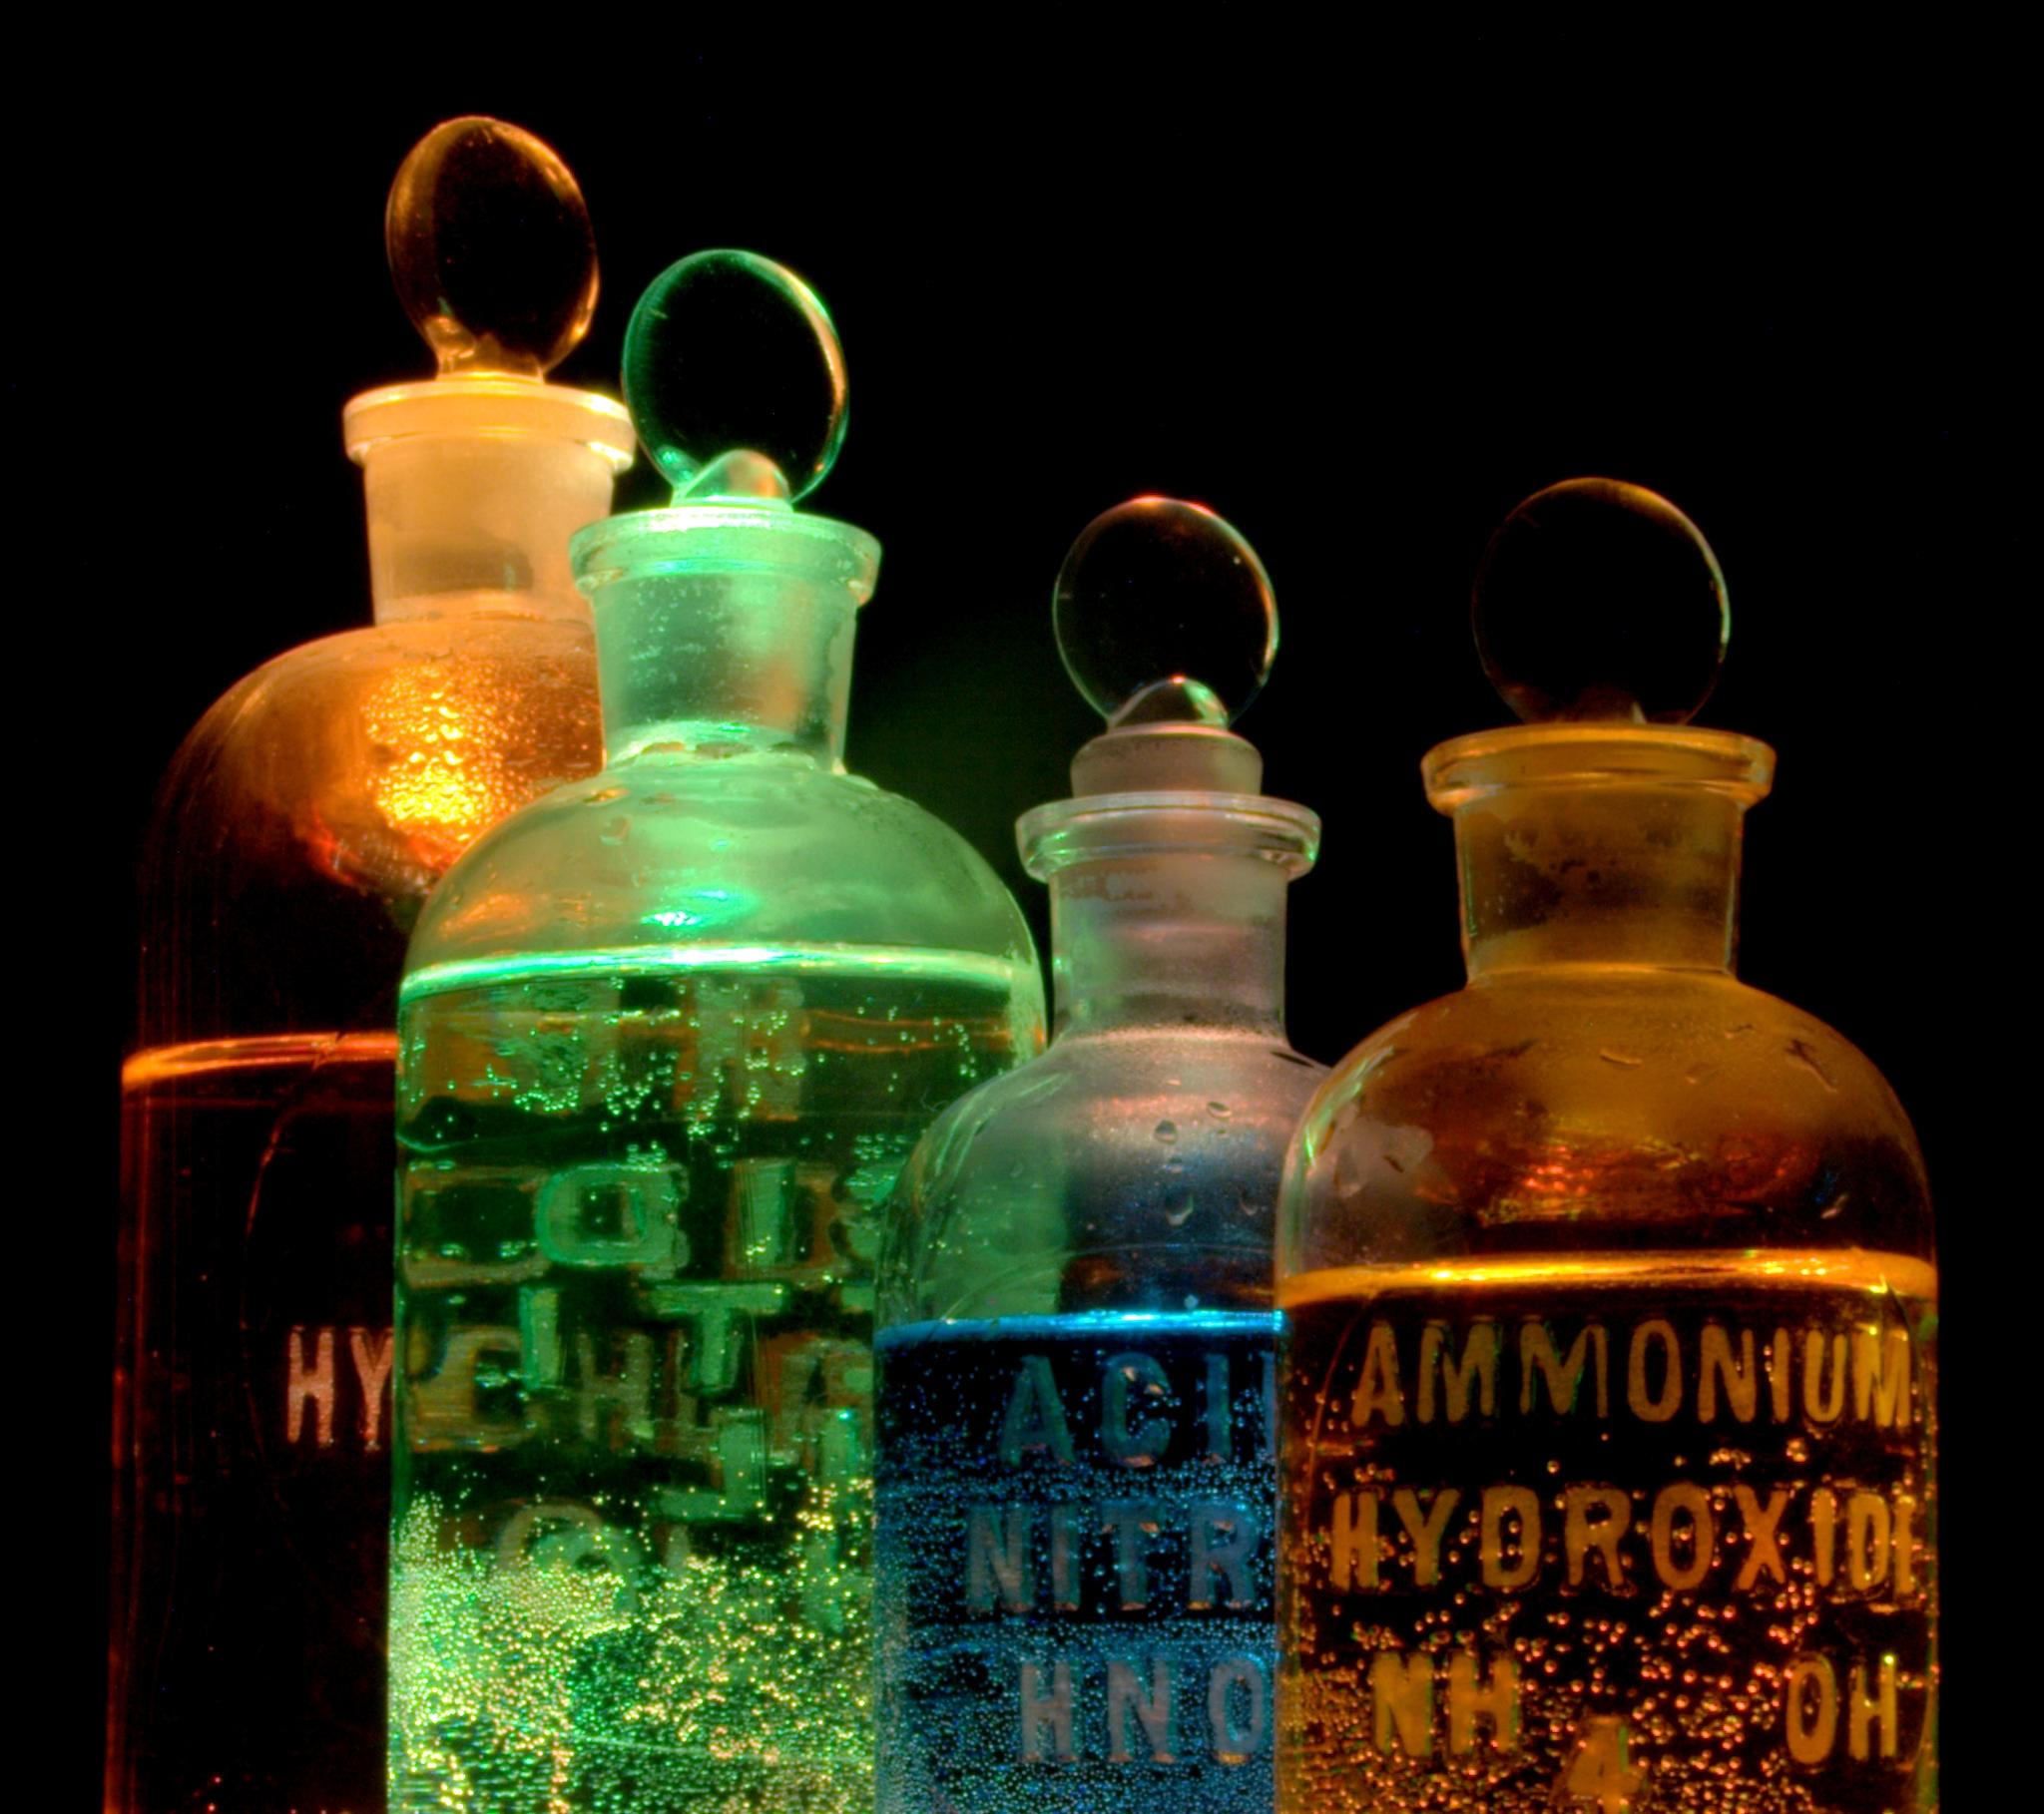 File:Chemicals in flasks.jpg - Wikimedia Commons